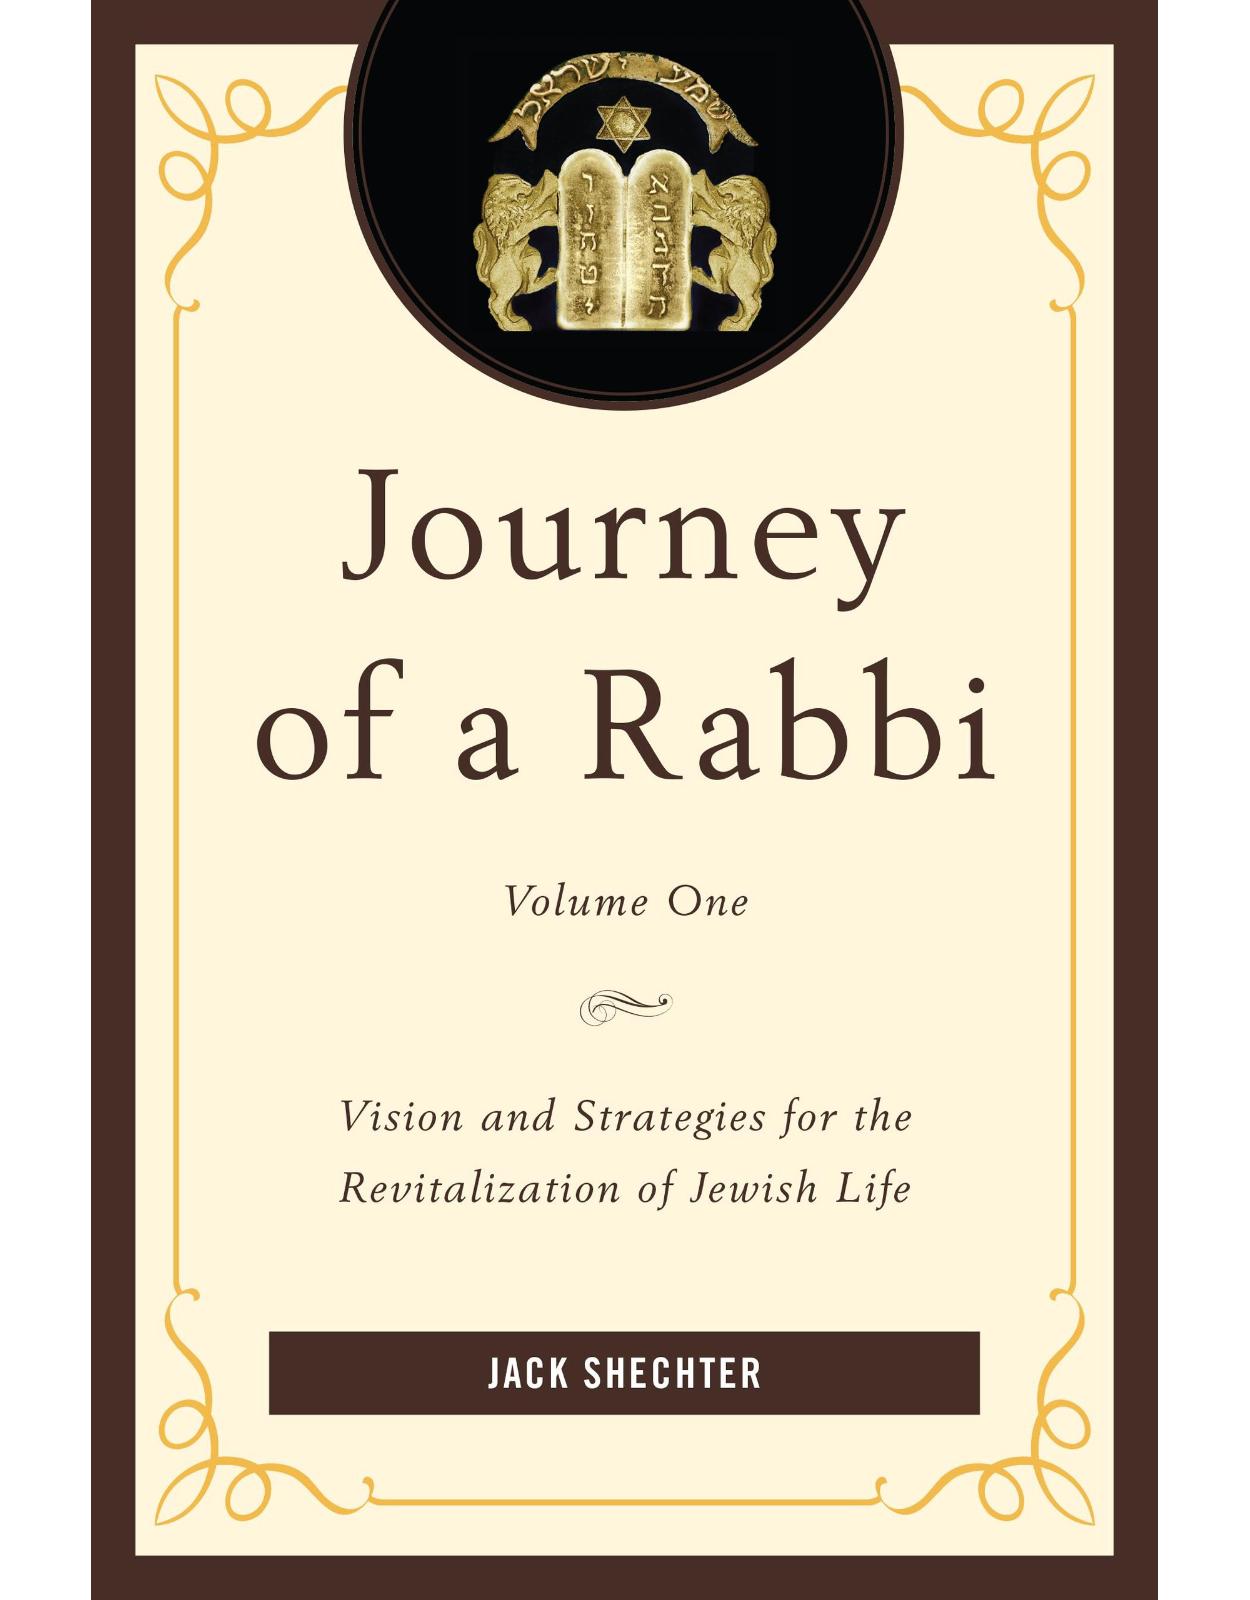 Journey of a Rabbi: Vision and Strategies for the Revitalization of Jewish Life, Volume 1